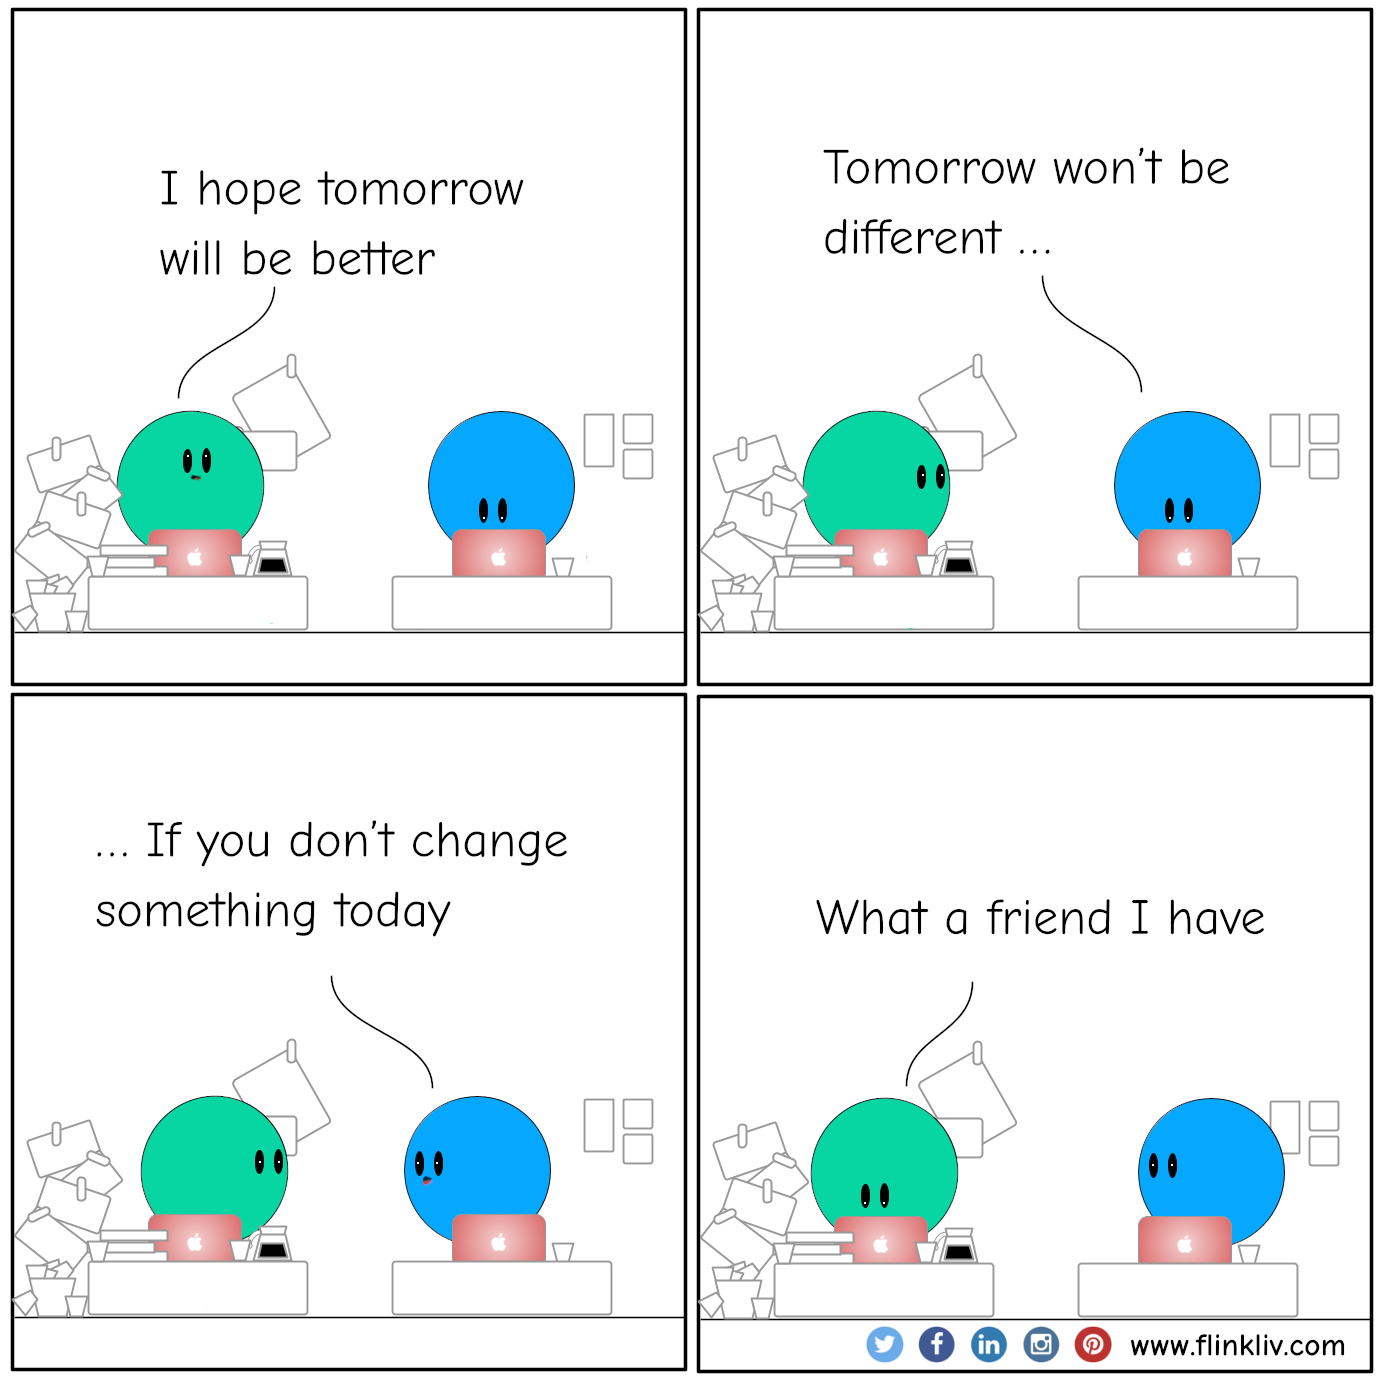 Conversation between A and B about Tomorrow won’t be different if you don’t change something today
				A: I hope tomorrow will be better
				B: Tomorrow won’t be different if you don’t change something today
				A: What a friend I have
			